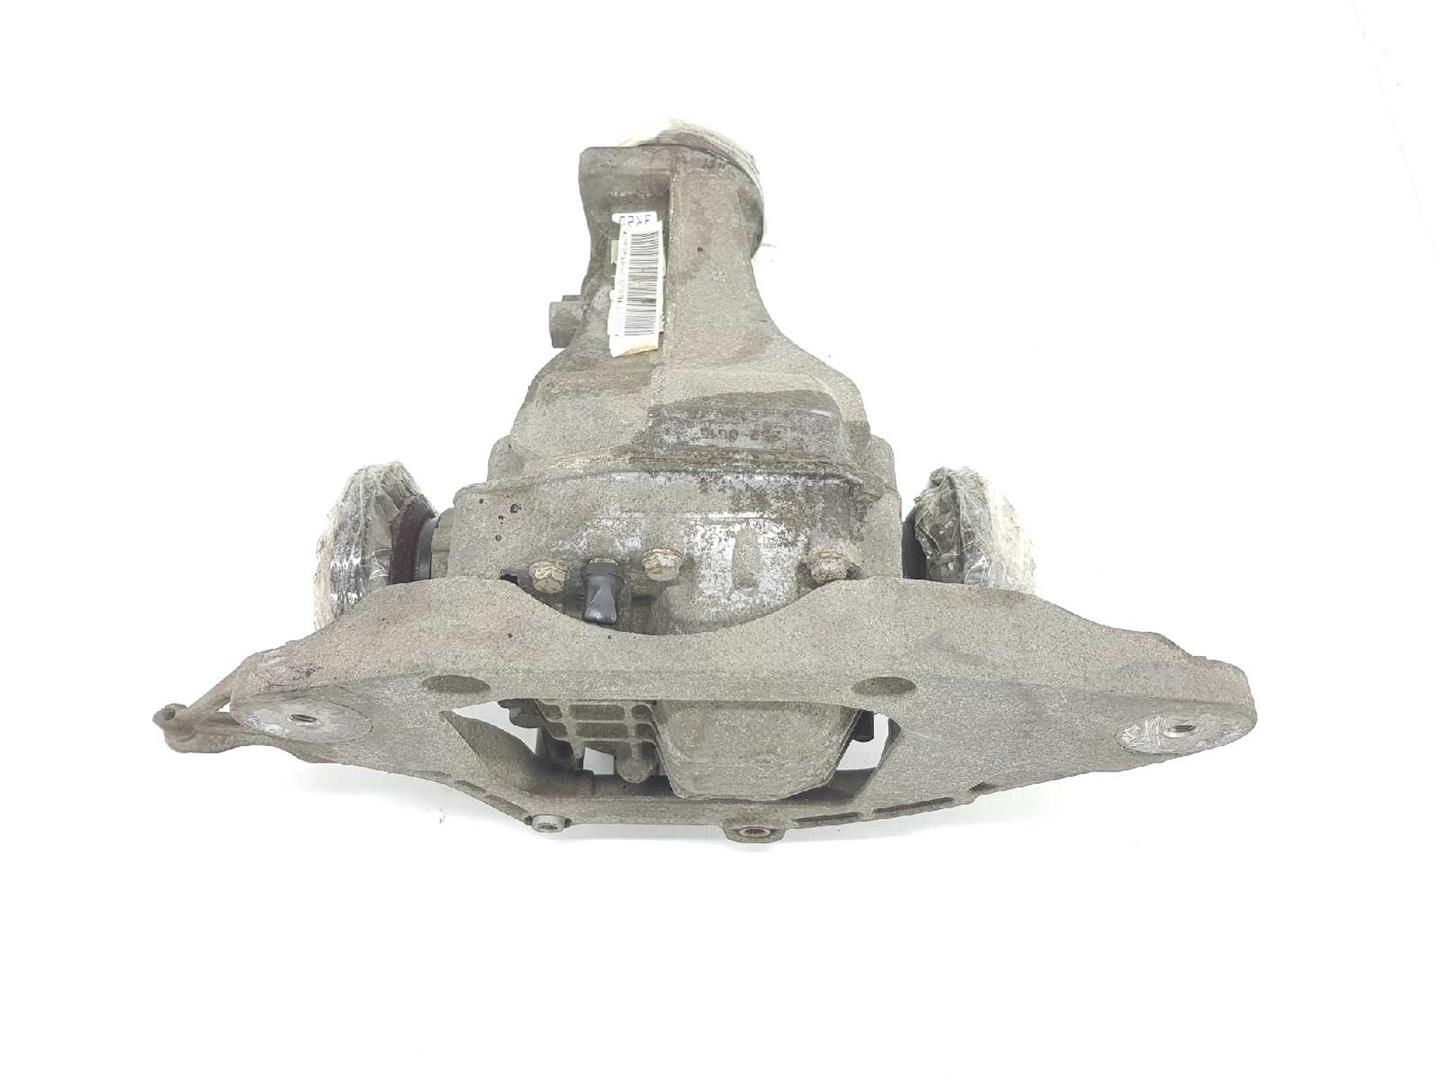 AUDI A7 C7/4G (2010-2020) Rear Differential 0BC500044A, 0BC500044A 19715950